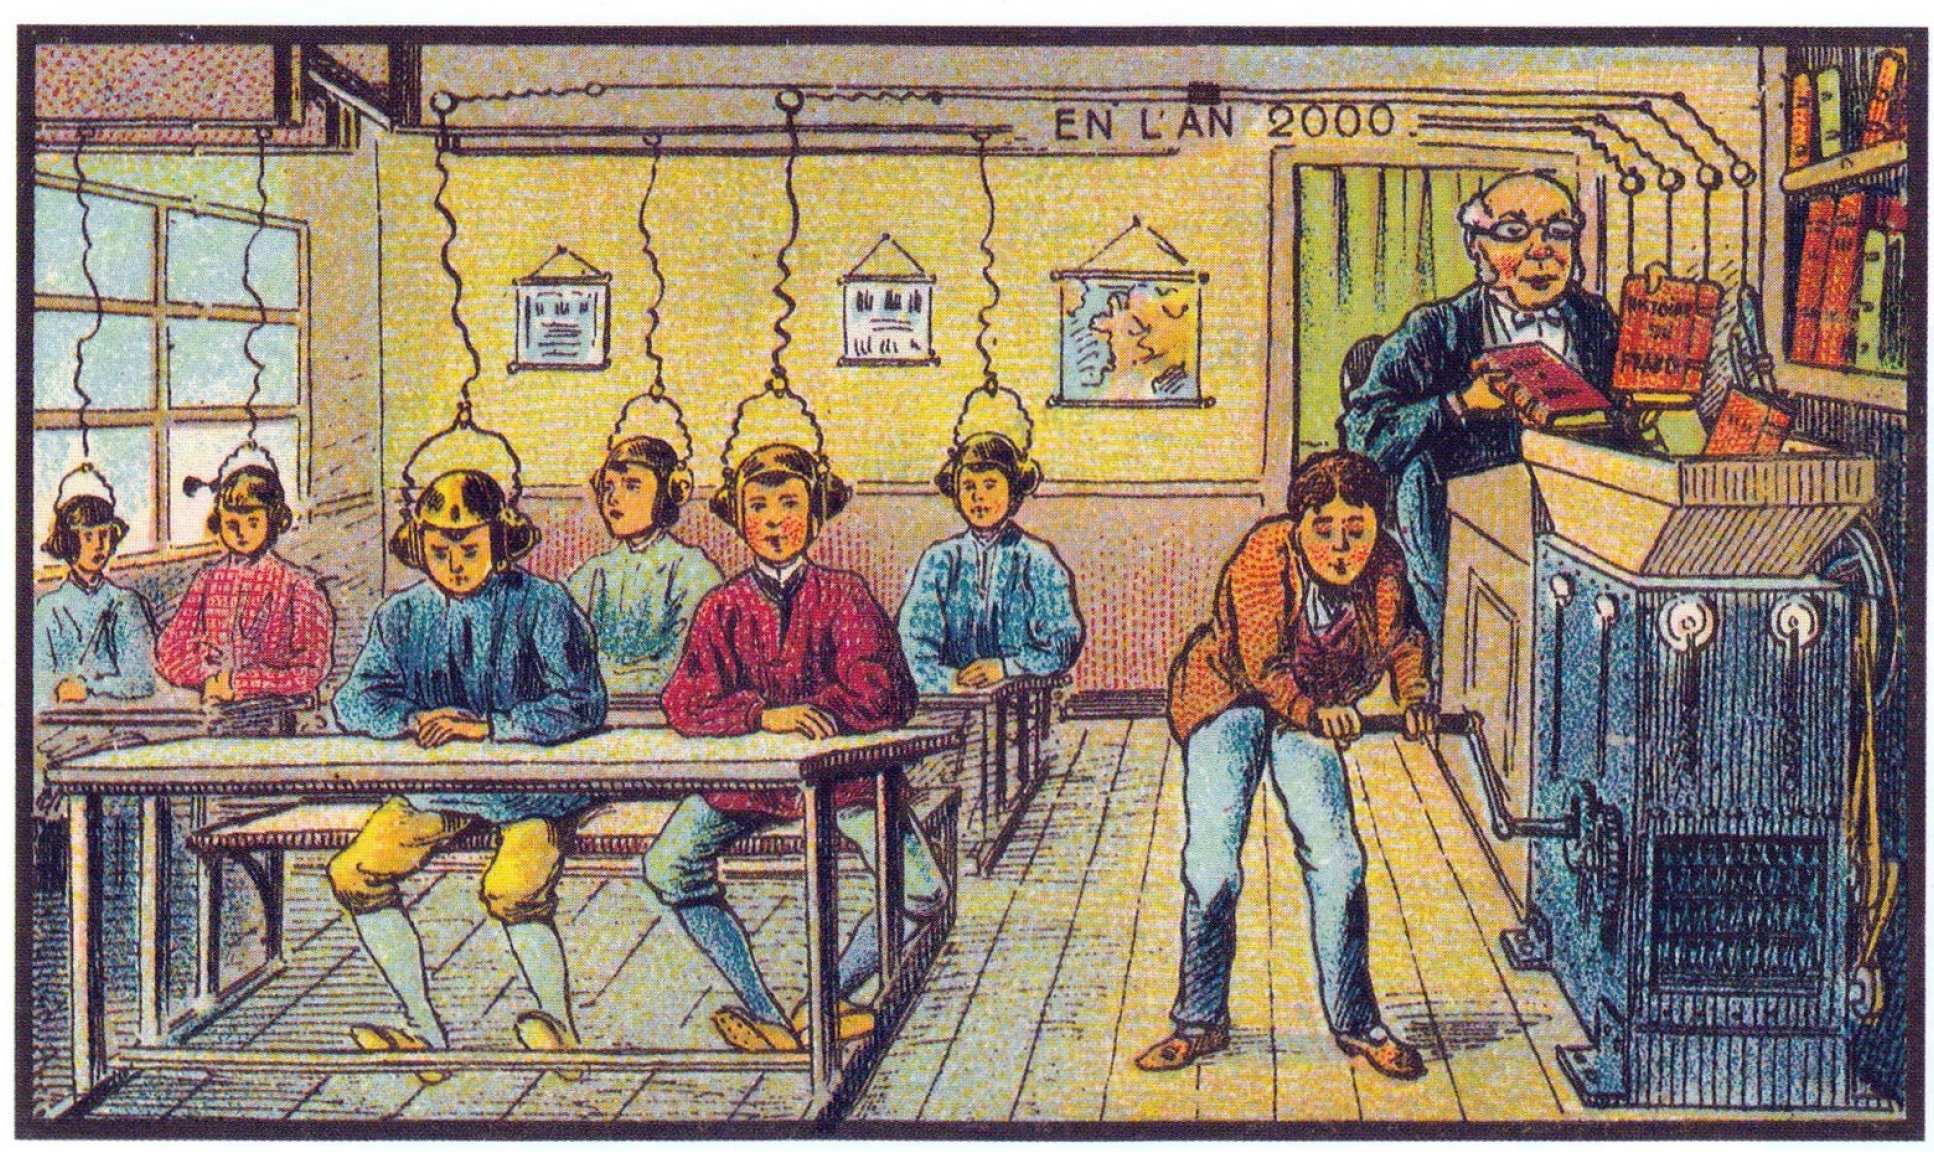 Futurologists of 1910 were profoundly wrong about the classroom of 2000, just as we may be wrong about AI today, Gideon Shimshon noted.